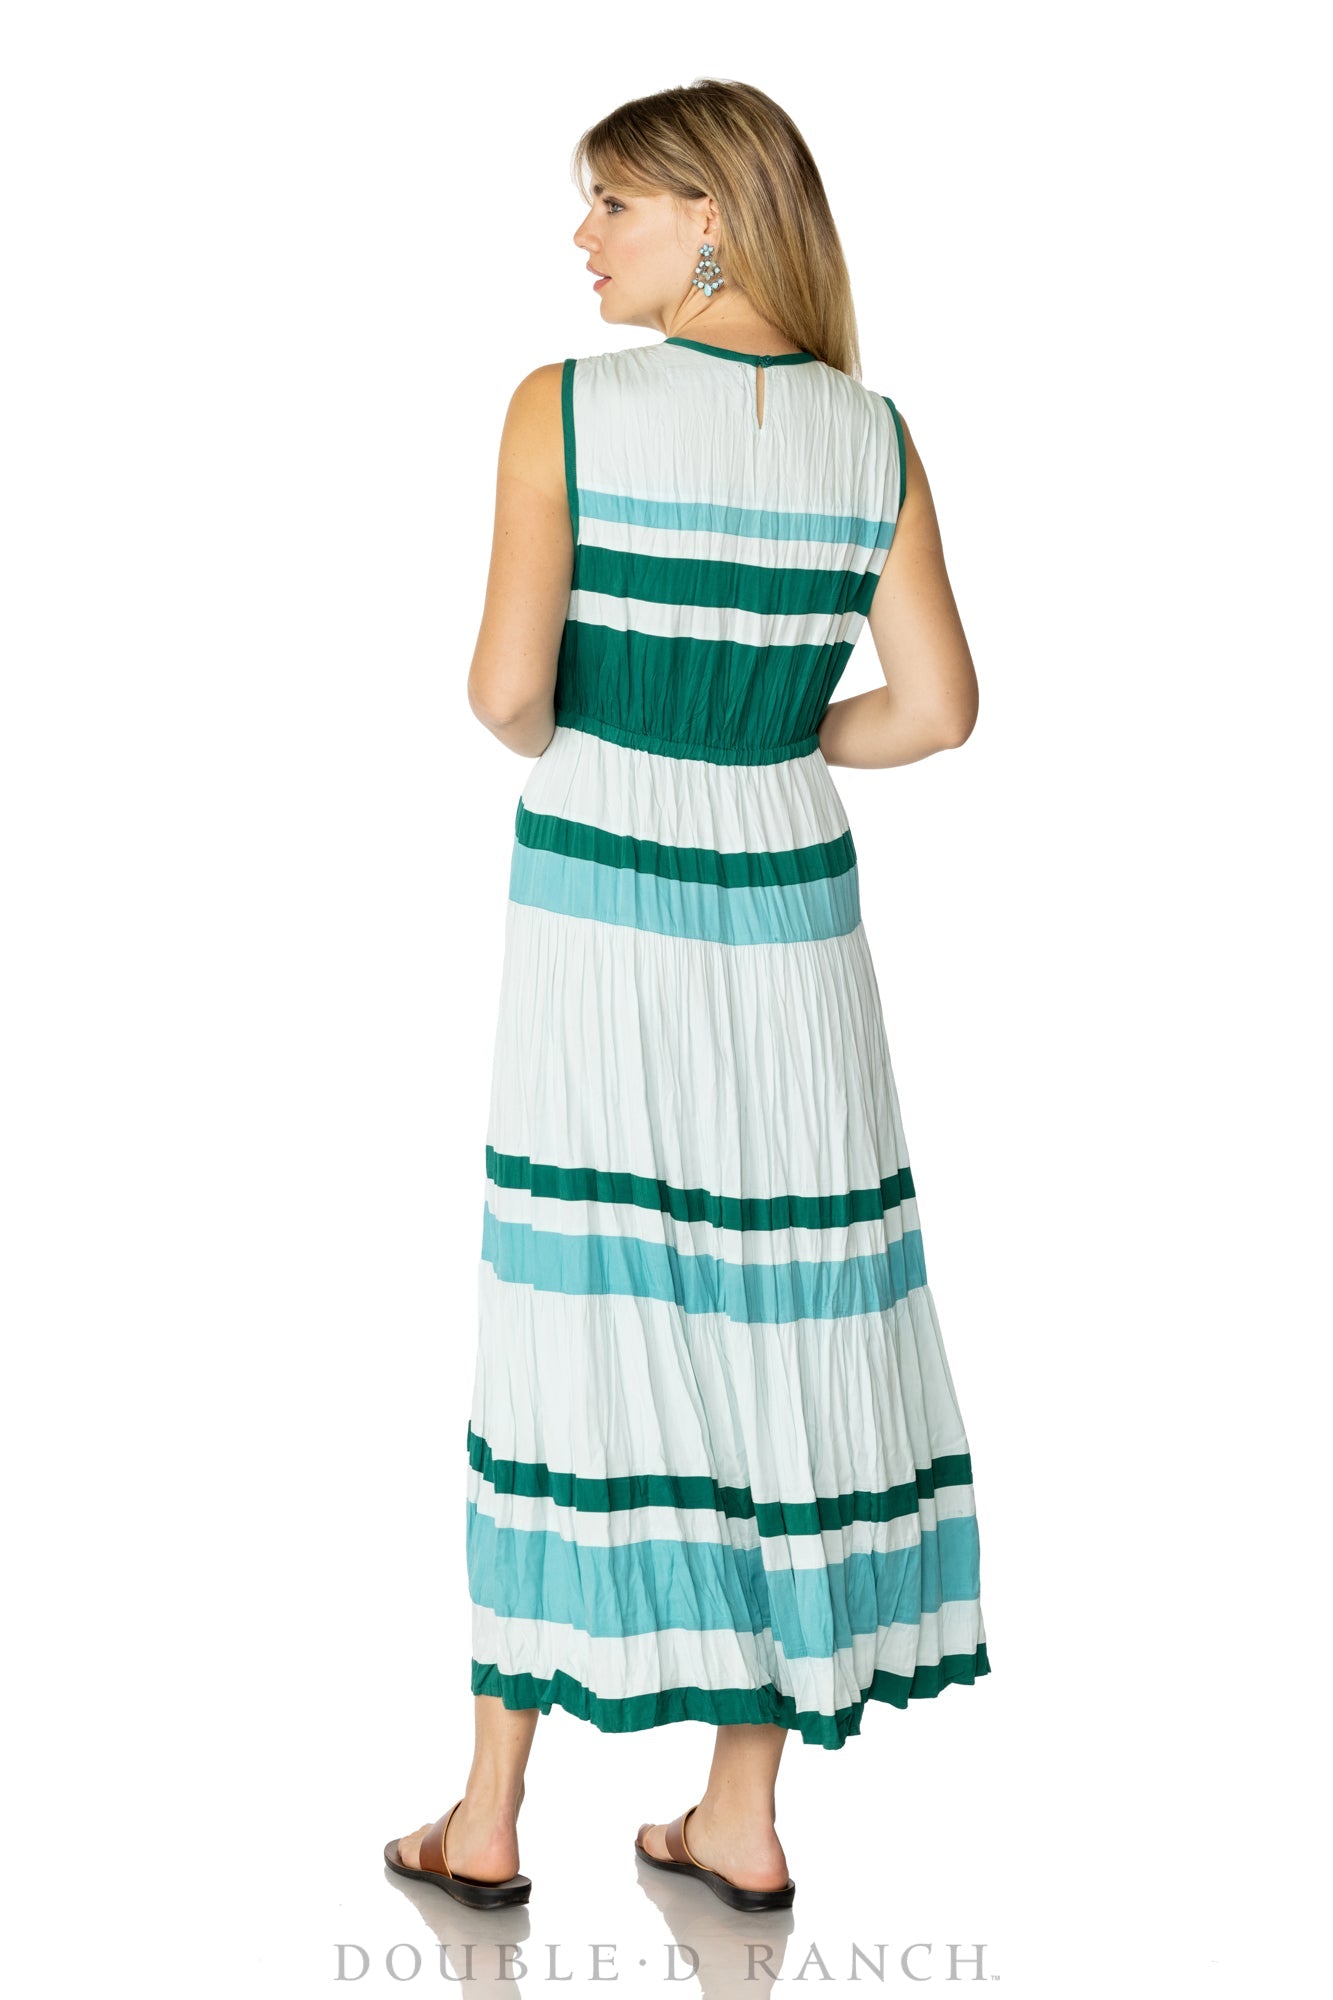 DDR Runaway Teal maxi dress at 6Whiskey six whisky by double d ranch style number D1334 womens spring folk foray 